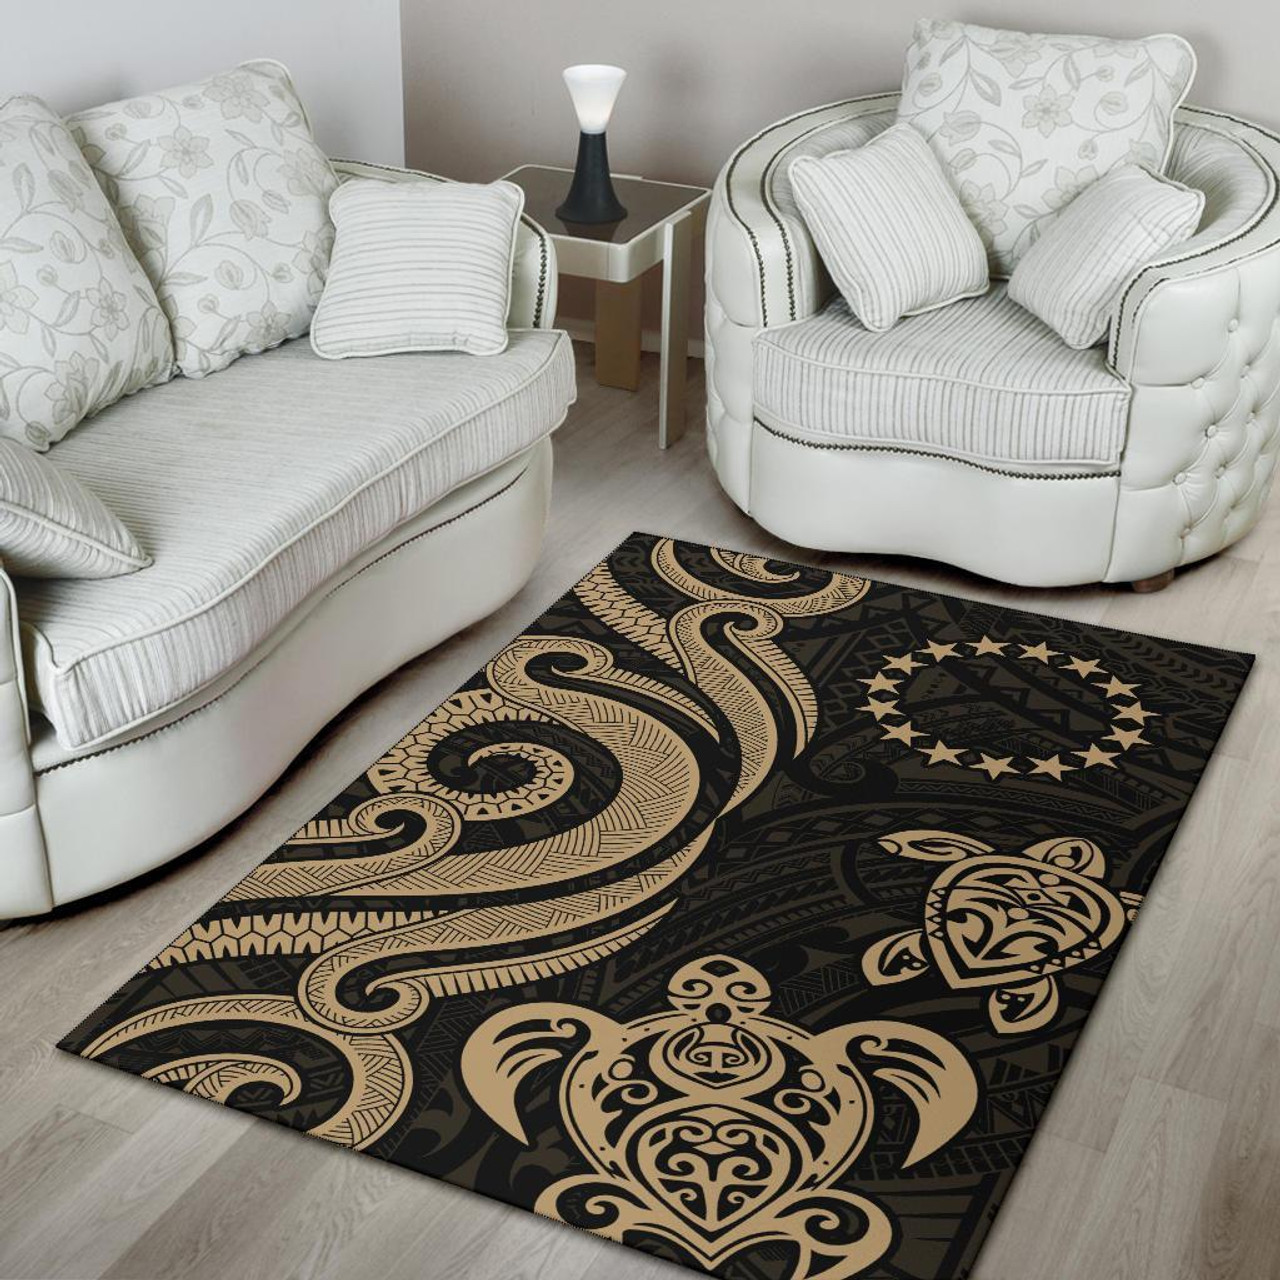 Cook Islands Area Rug - Gold Tentacle Turtle Polynesian 4